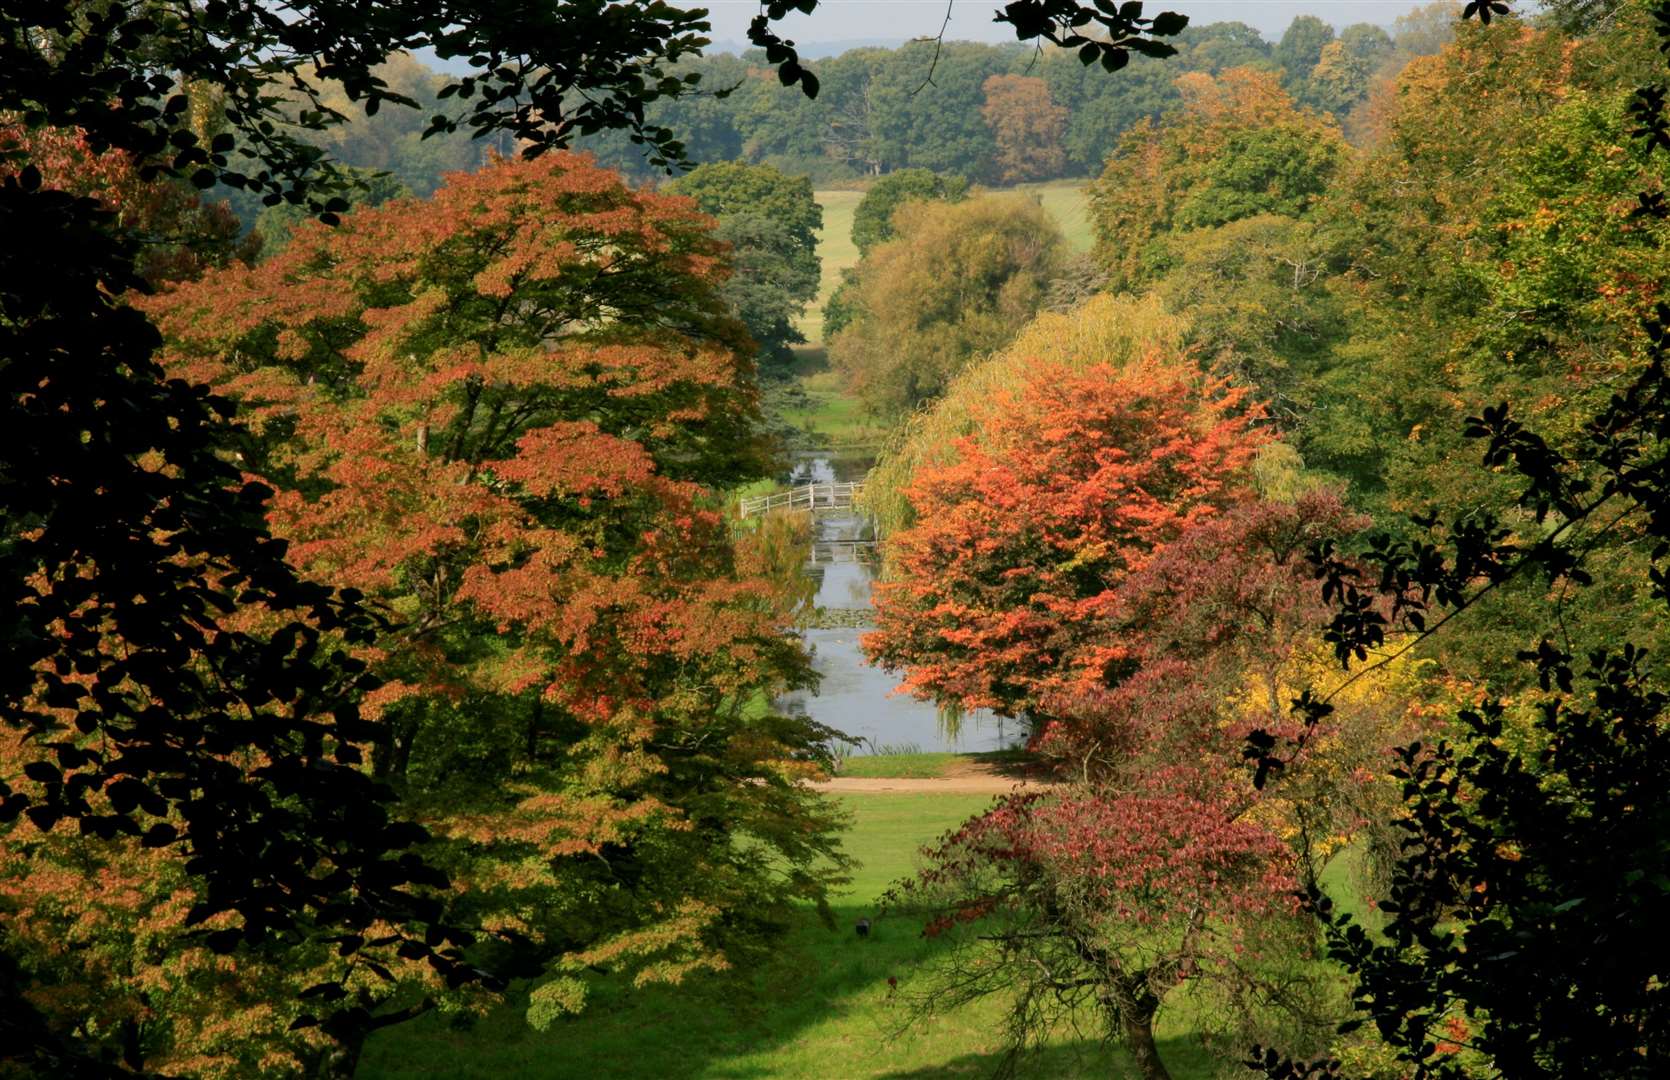 The lake will be surrounded by autumn trees. Picture: Hever Castle and Gardens